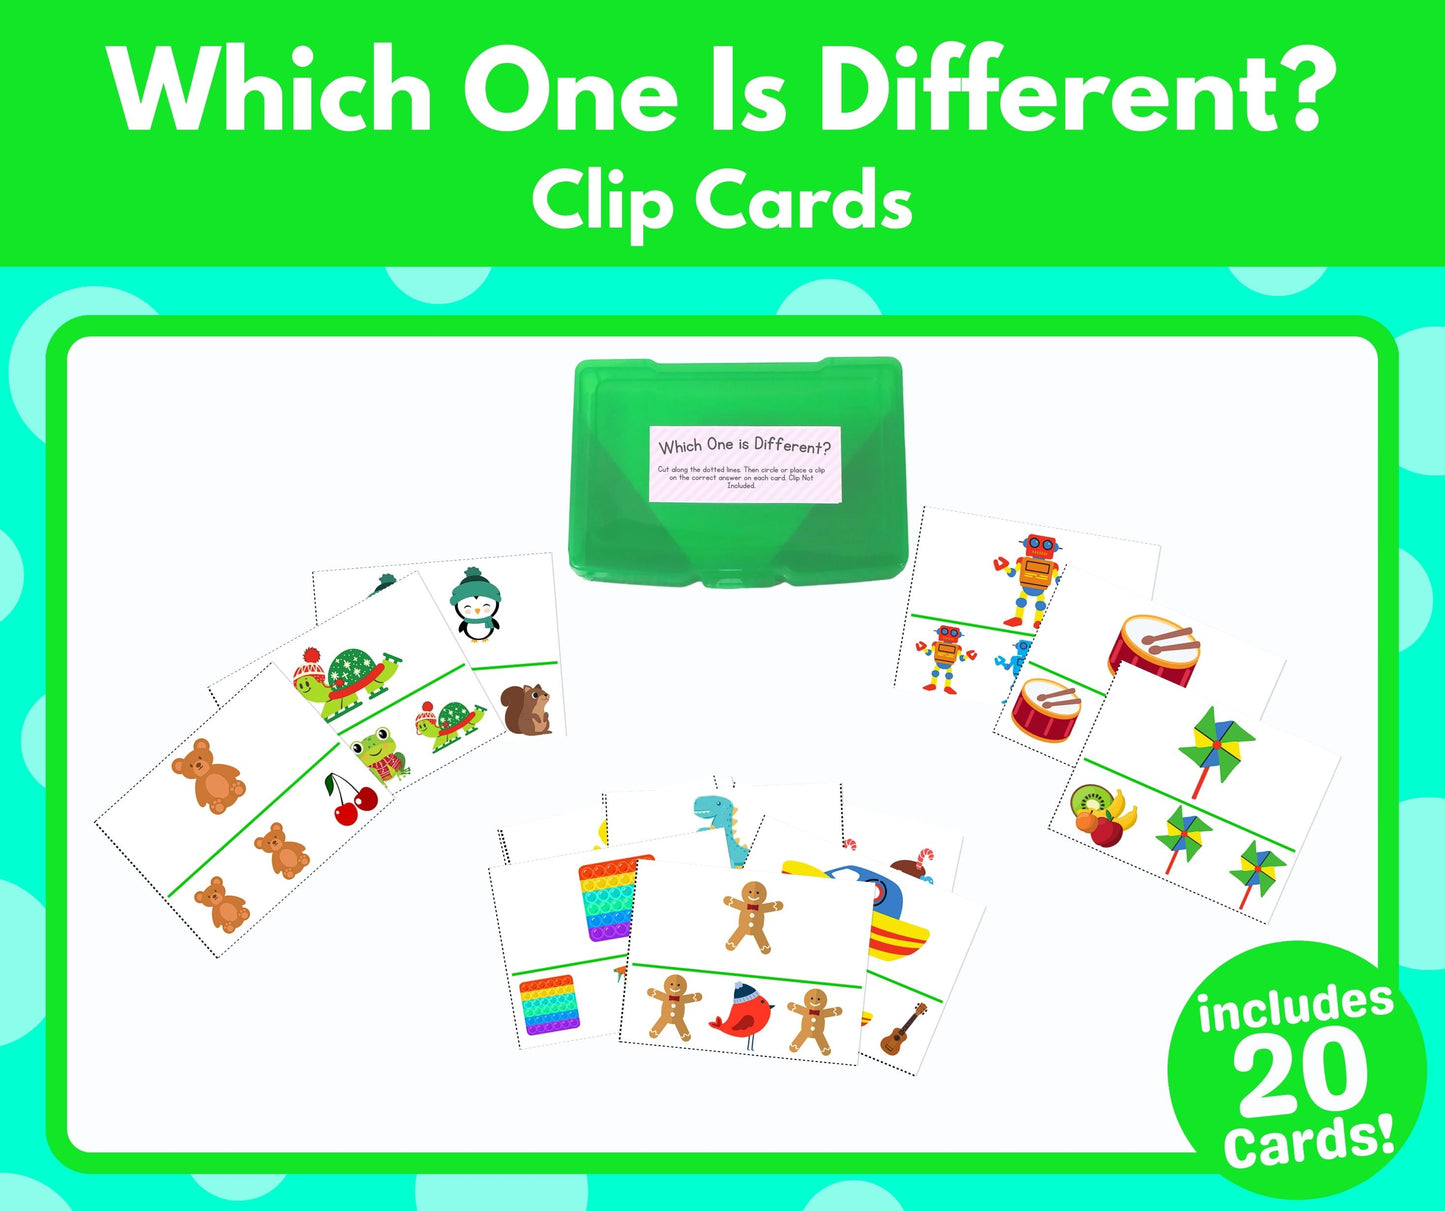 Which One is Different? Clip Cards (Task Box Activity) - Download